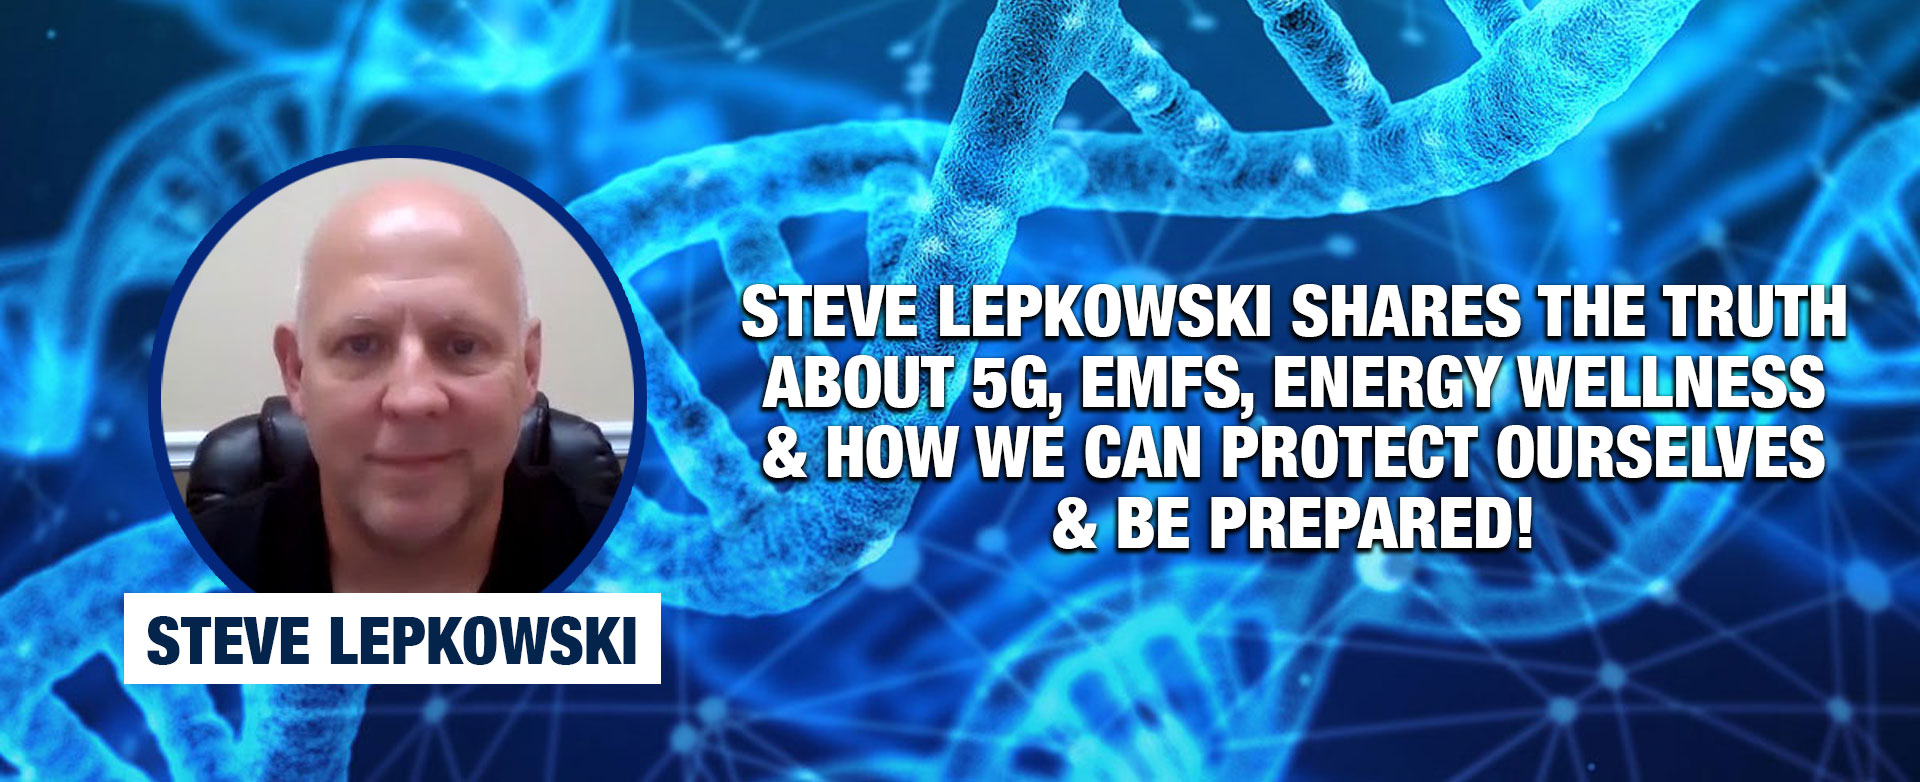 MyPatriotsNetwork-Steve Lepkowski Shares The Truth About 5G, EMFs, Energy Wellness & How We Can Protect Ourselves & Be Prepared!